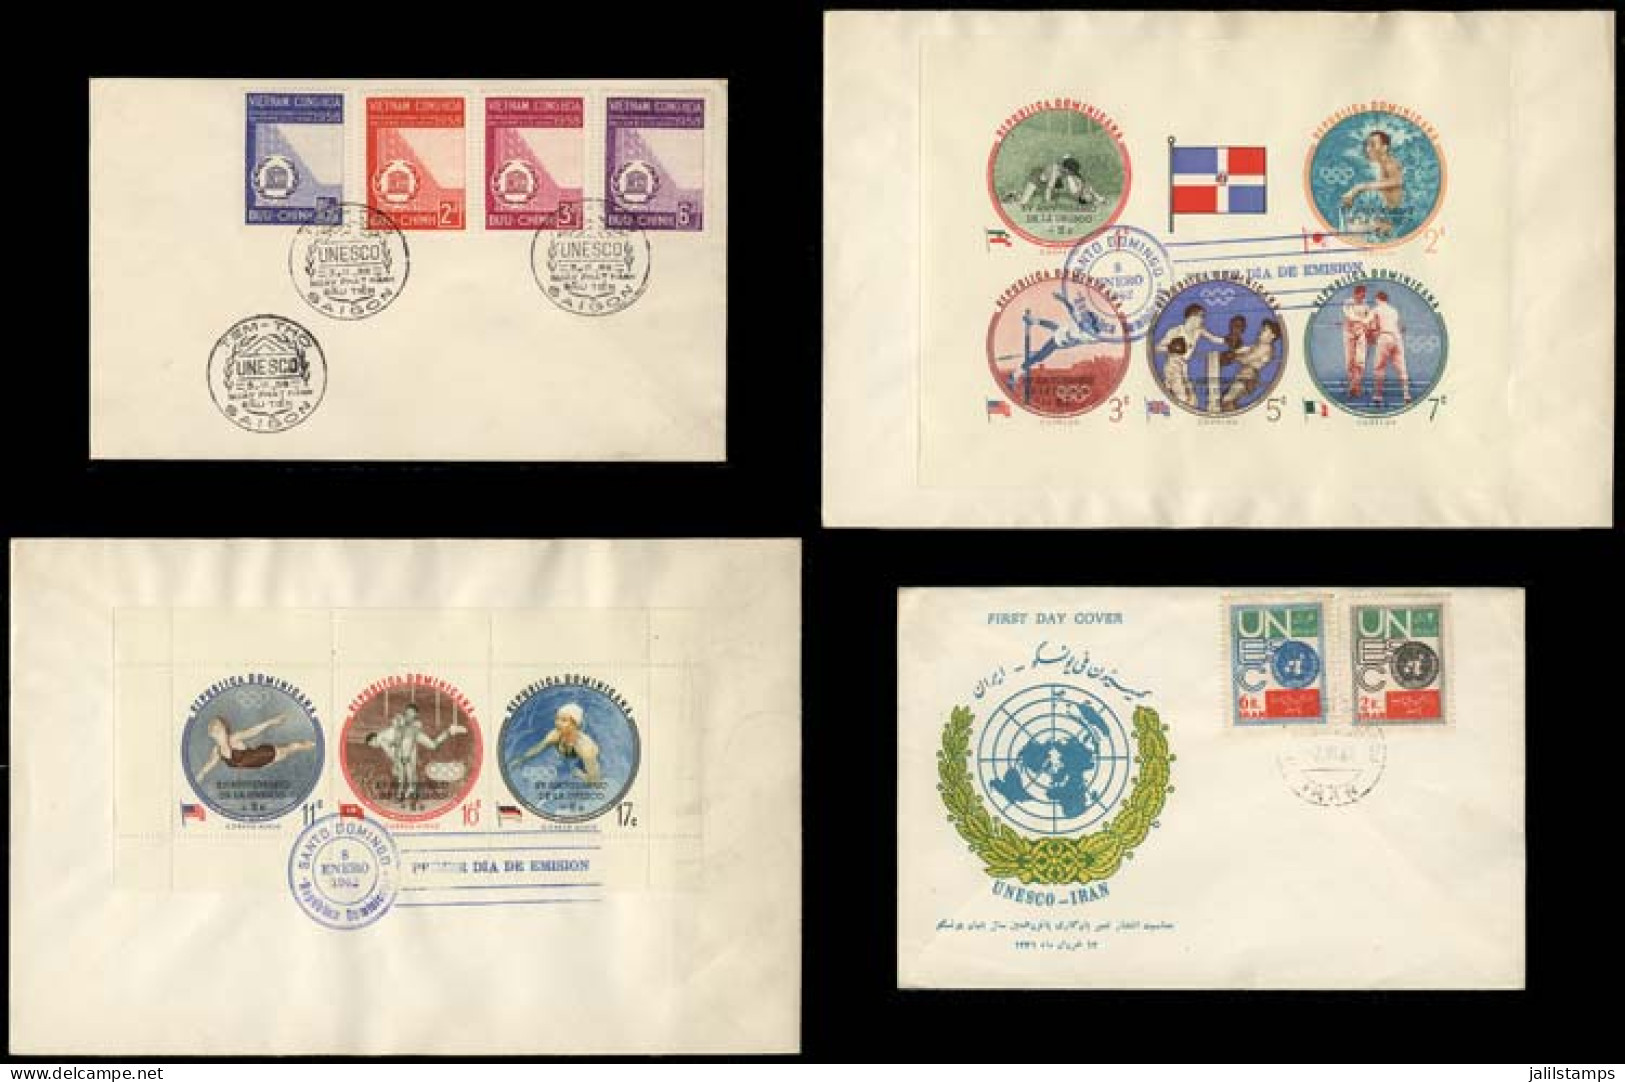 WORLDWIDE: TOPIC UNESCO: 47 Covers Of Various Countries, Some Very Scarce, VF General Quality, Good Lot, Low Start! - Lots & Kiloware (mixtures) - Max. 999 Stamps